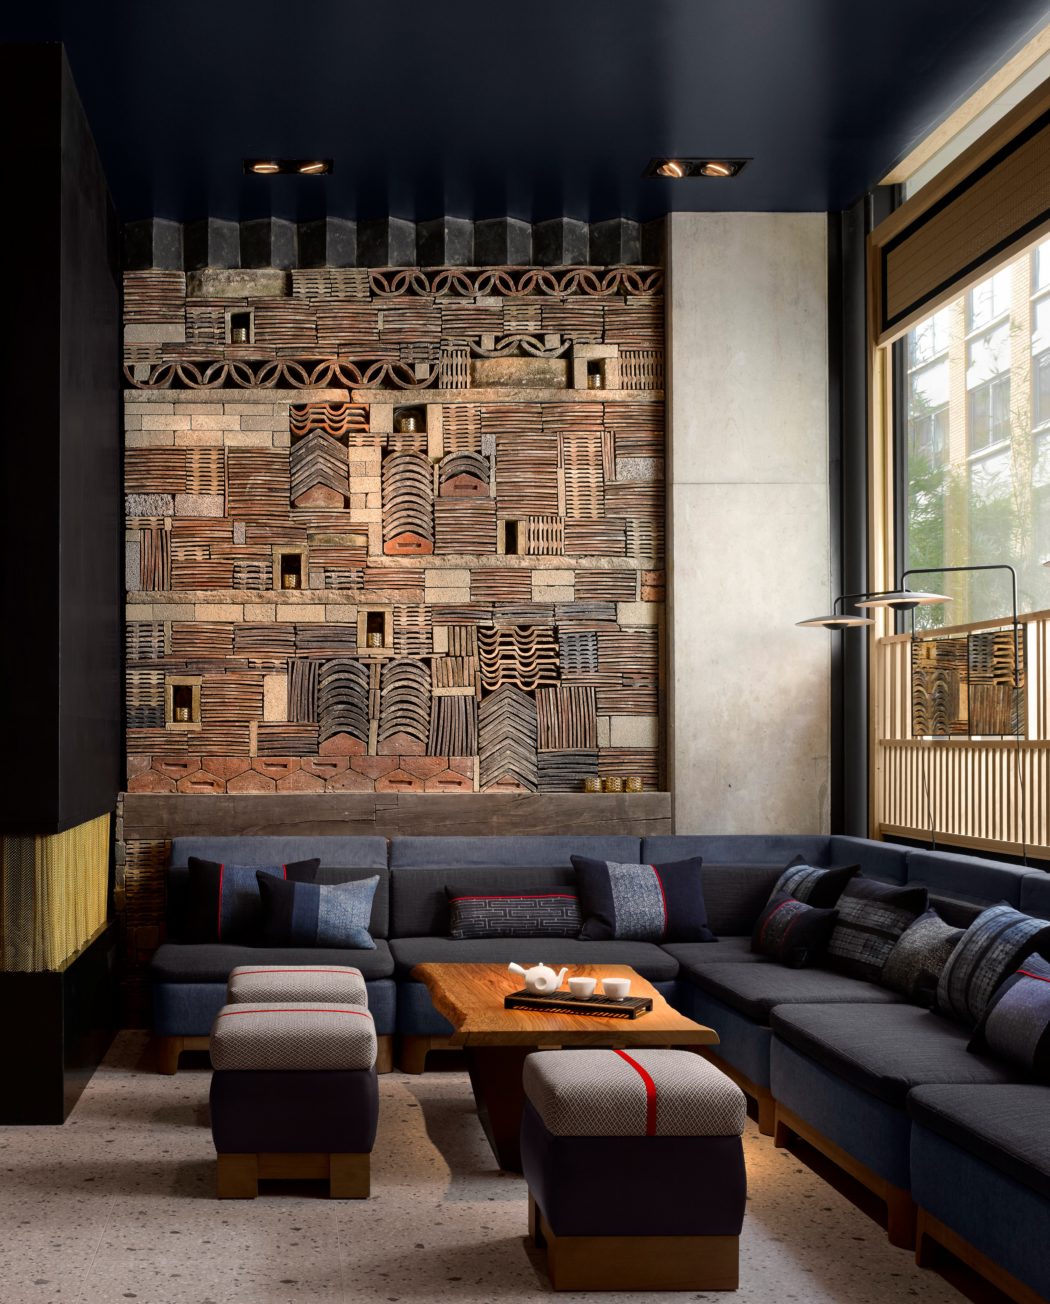 Chic lounge with textured wooden wall art and stylish seating.